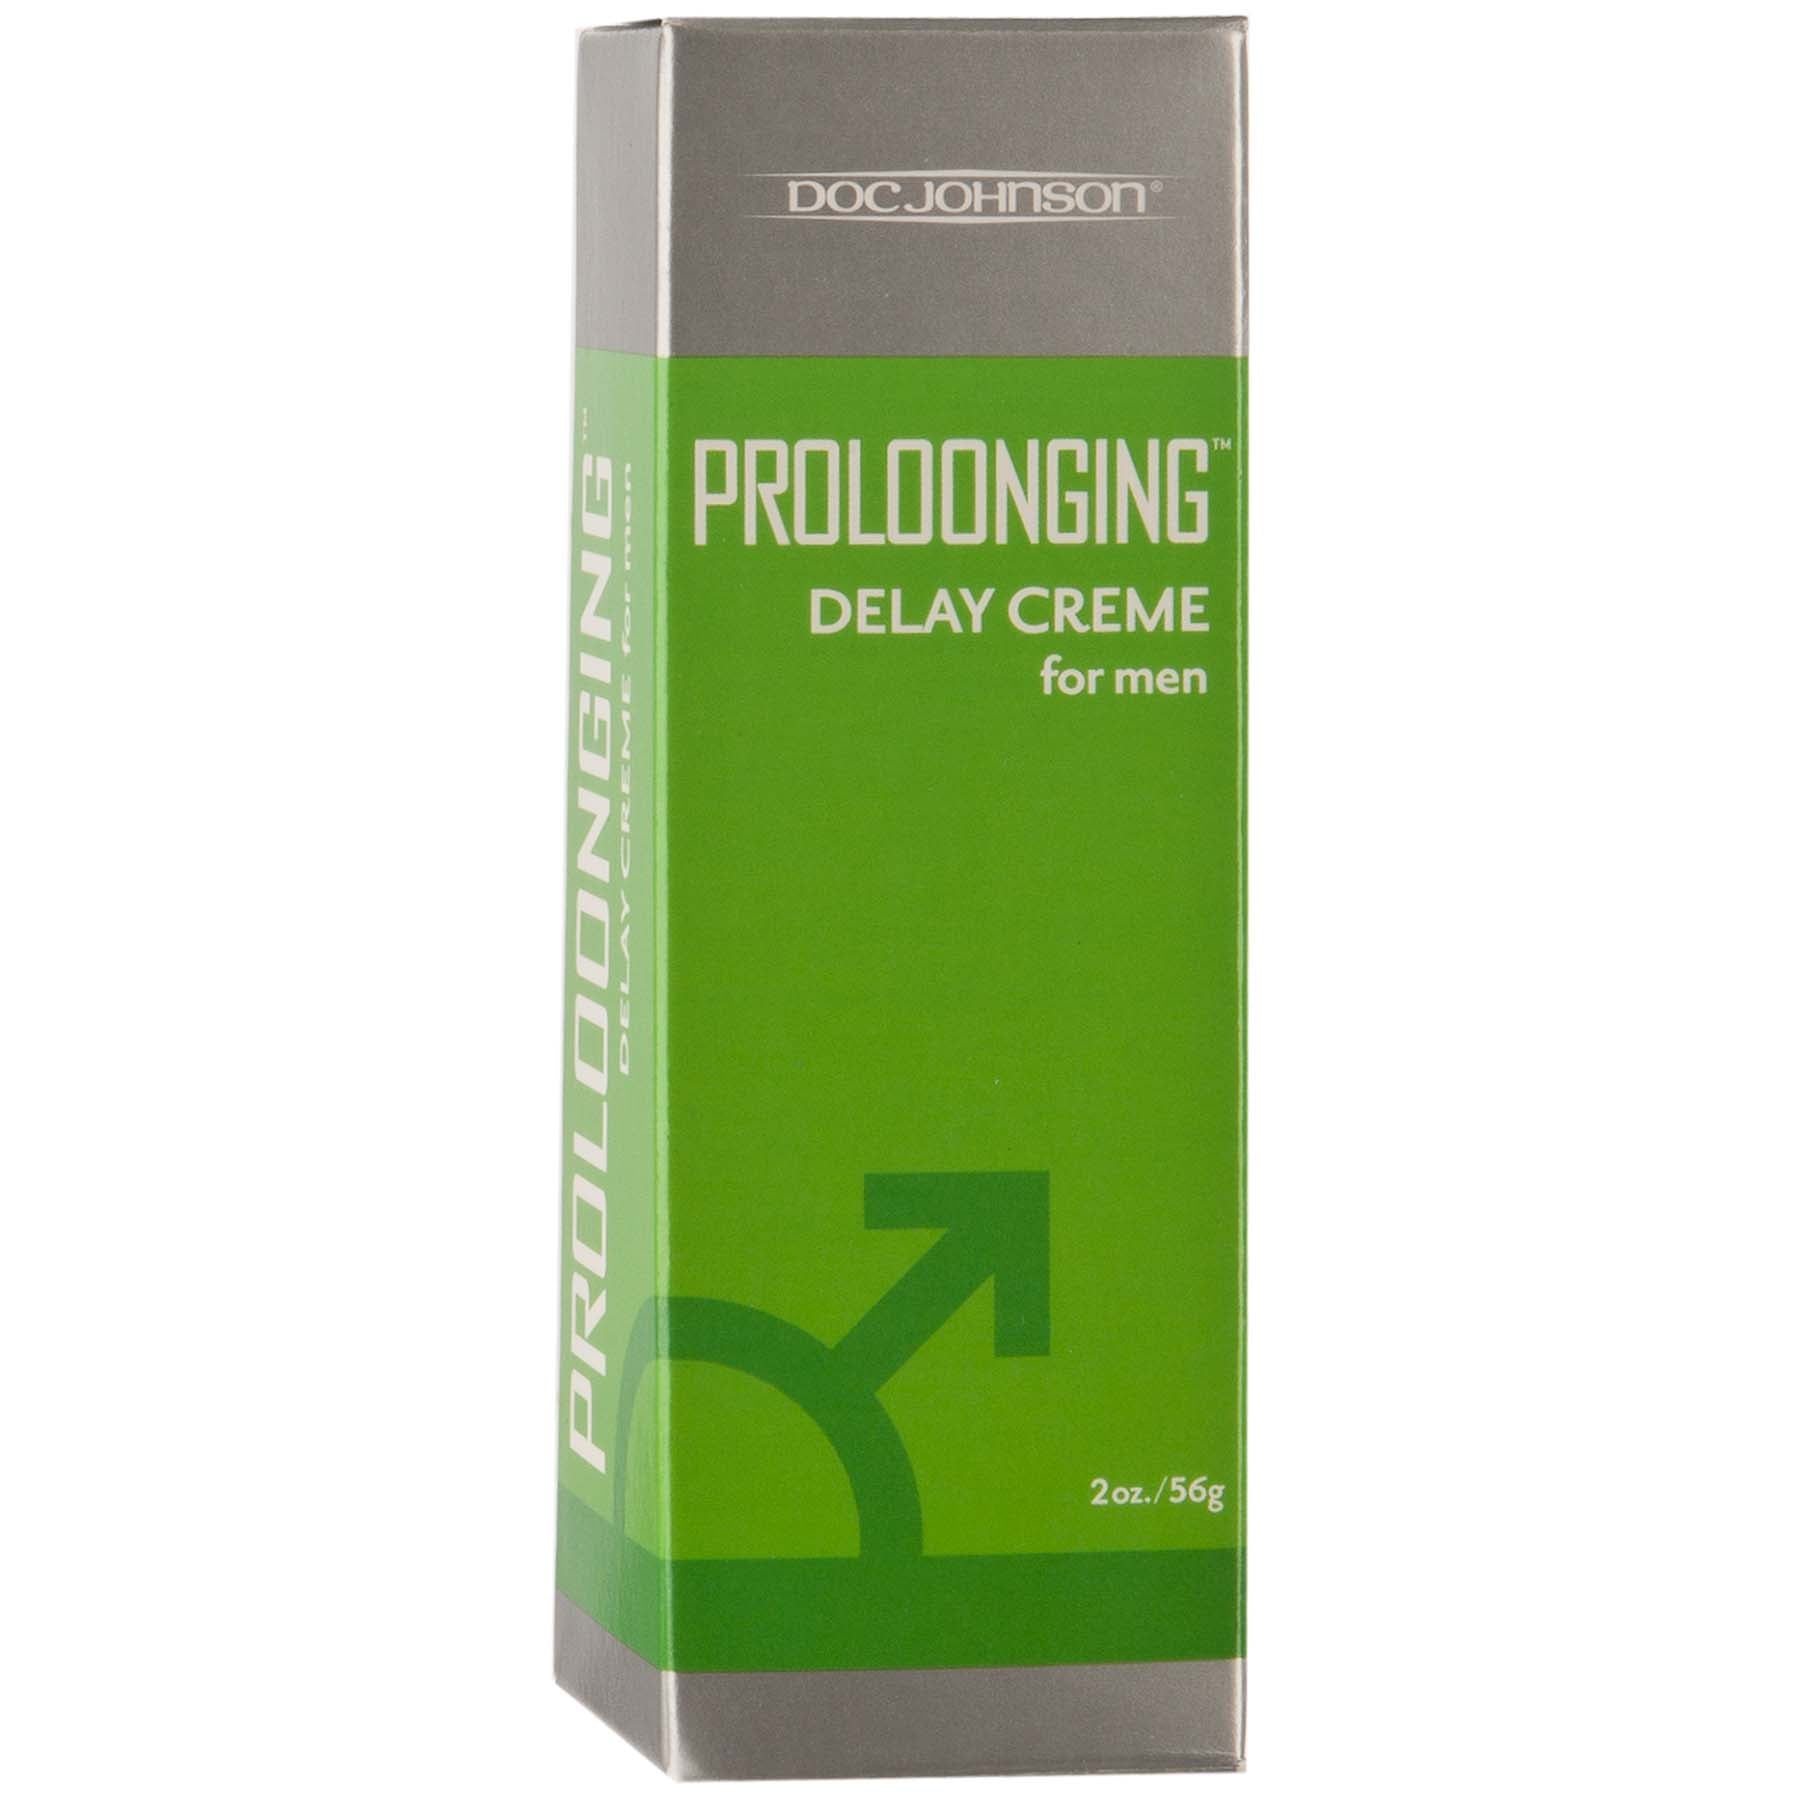 Proloonging Delay Cream for Men - 2 Oz. - Boxed DJ1310-01